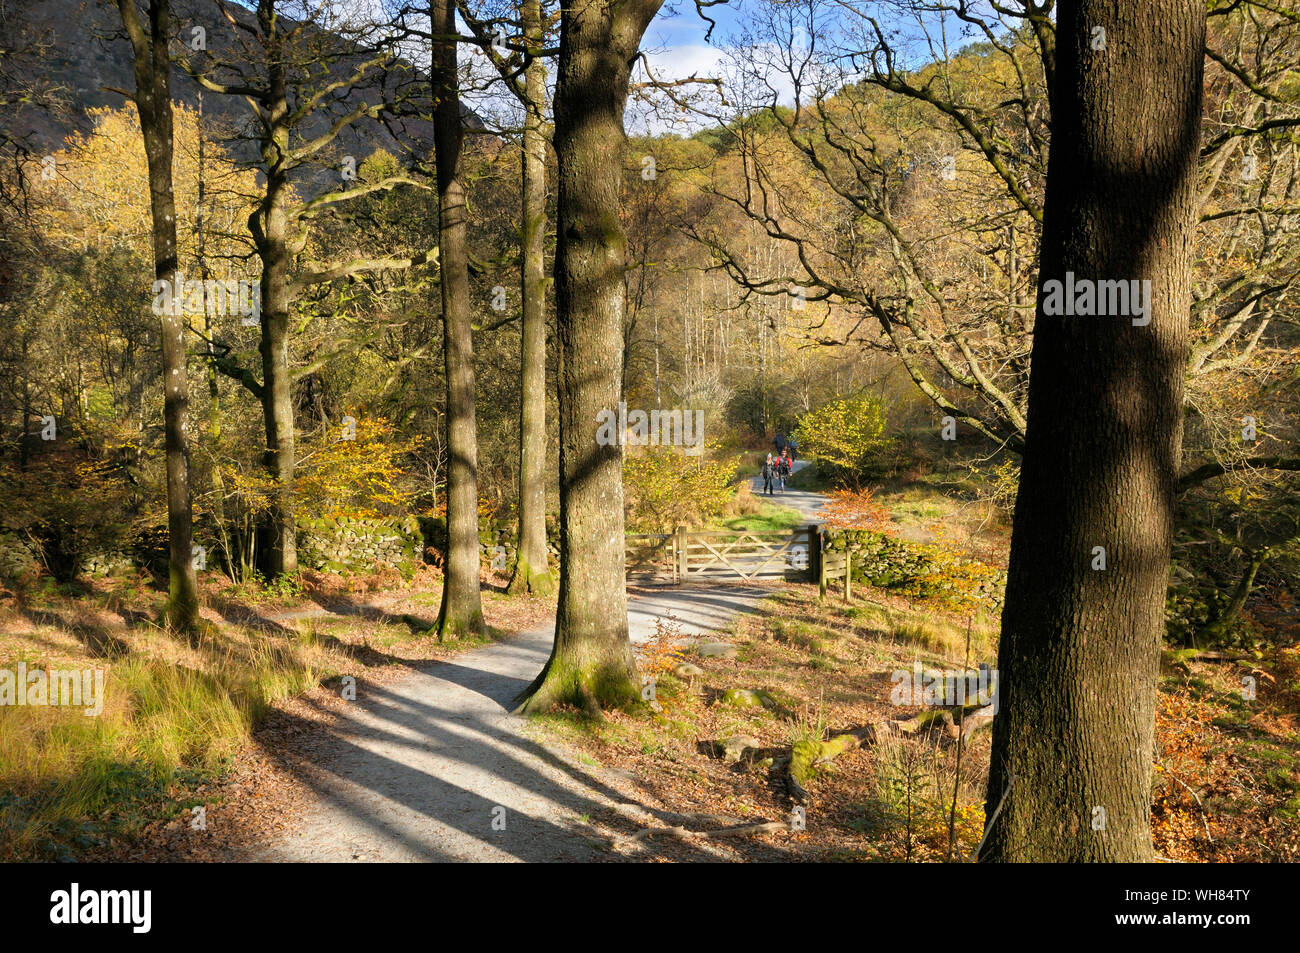 Autumn woodland at Penny Rock Wood, Grasmere, with a tree-lined path leading to a wooden gate, Lake District, England, UK Stock Photo